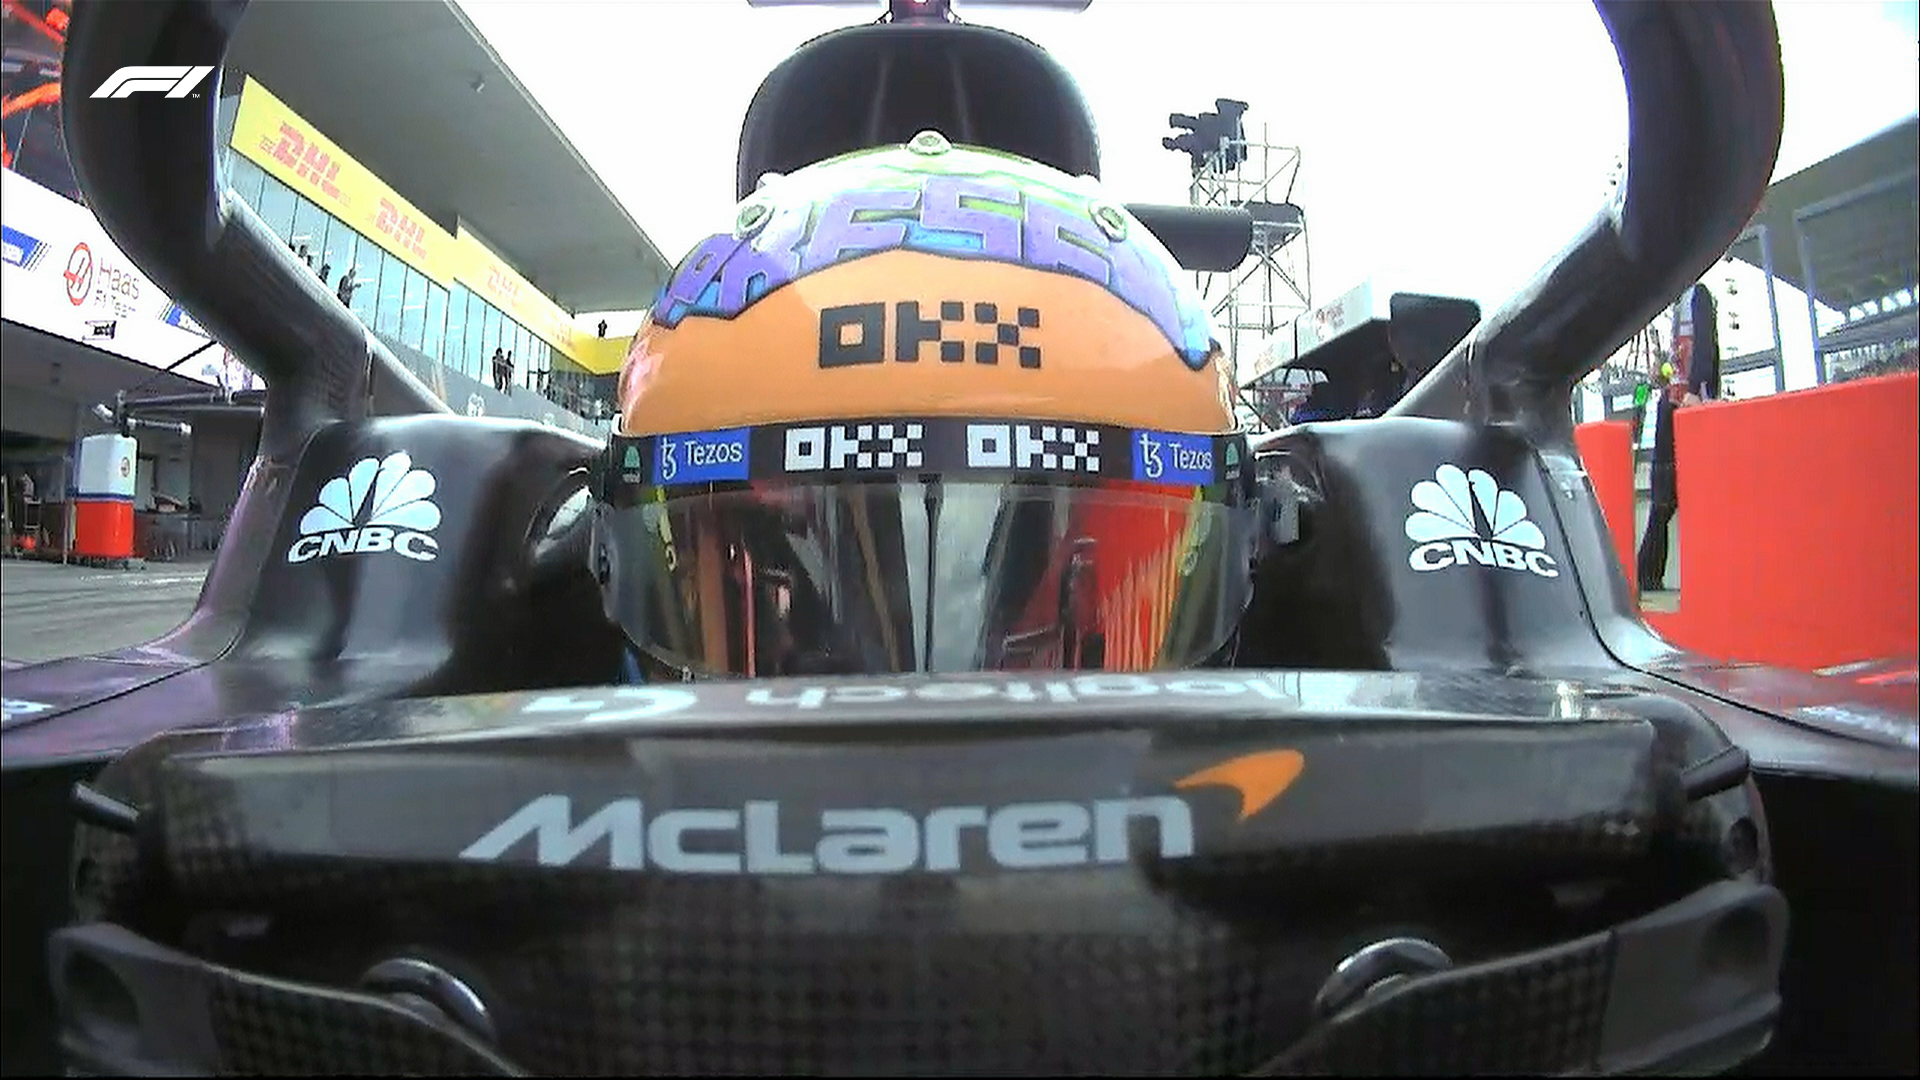 A front-facing camera angle of Daniel Ricciardo as he drives into the pit lane at the end of Q2. His steering wheel, helmet and halo can all be seen clearly.